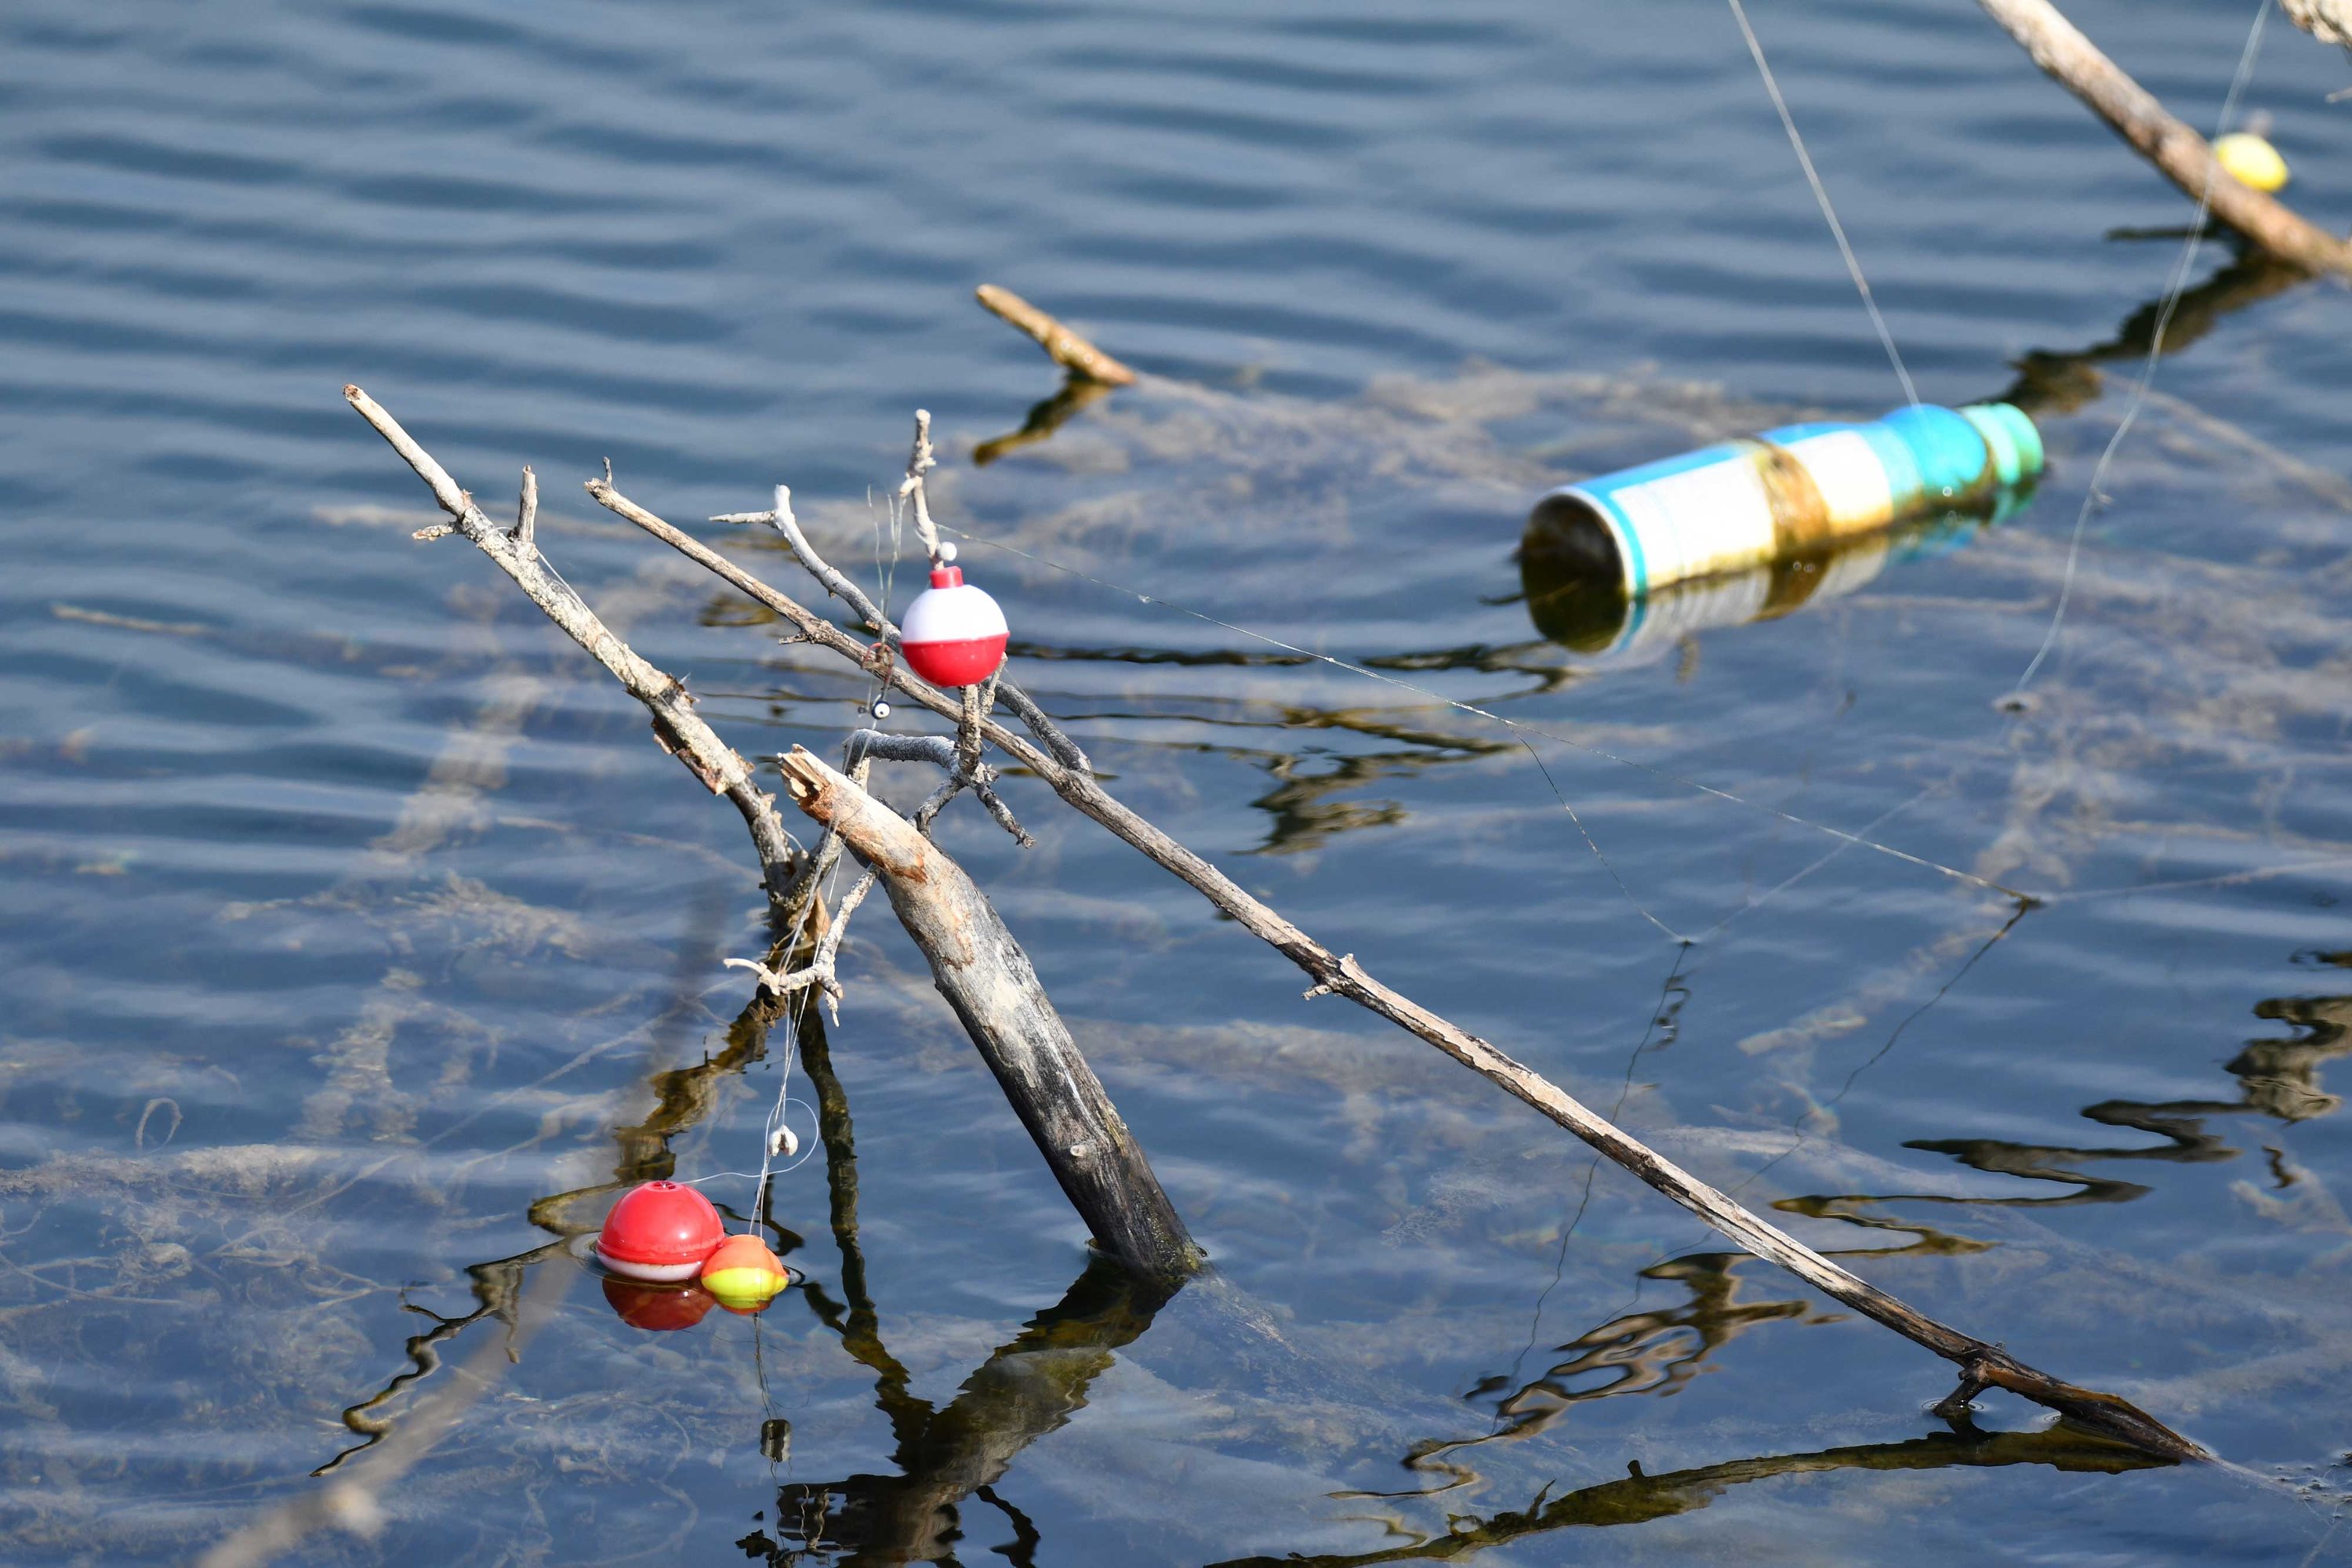 Fishing line in the water.